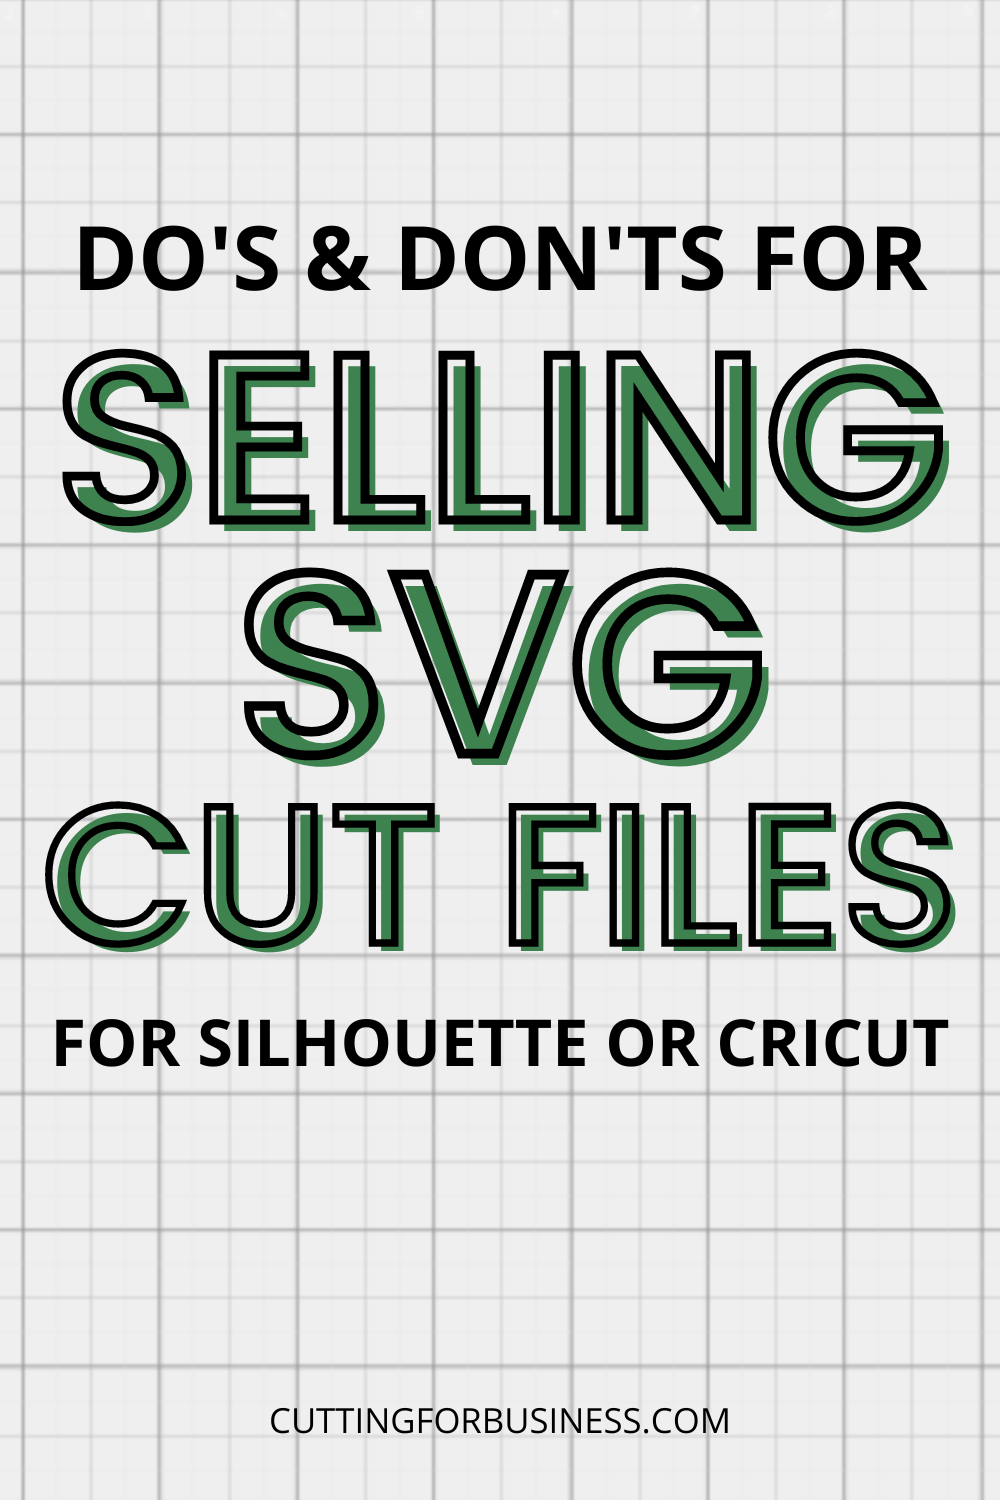 Do's and Don'ts for Selling SVG Cut Files for Silhouette or Cricut - by cuttingforbusiness.com.